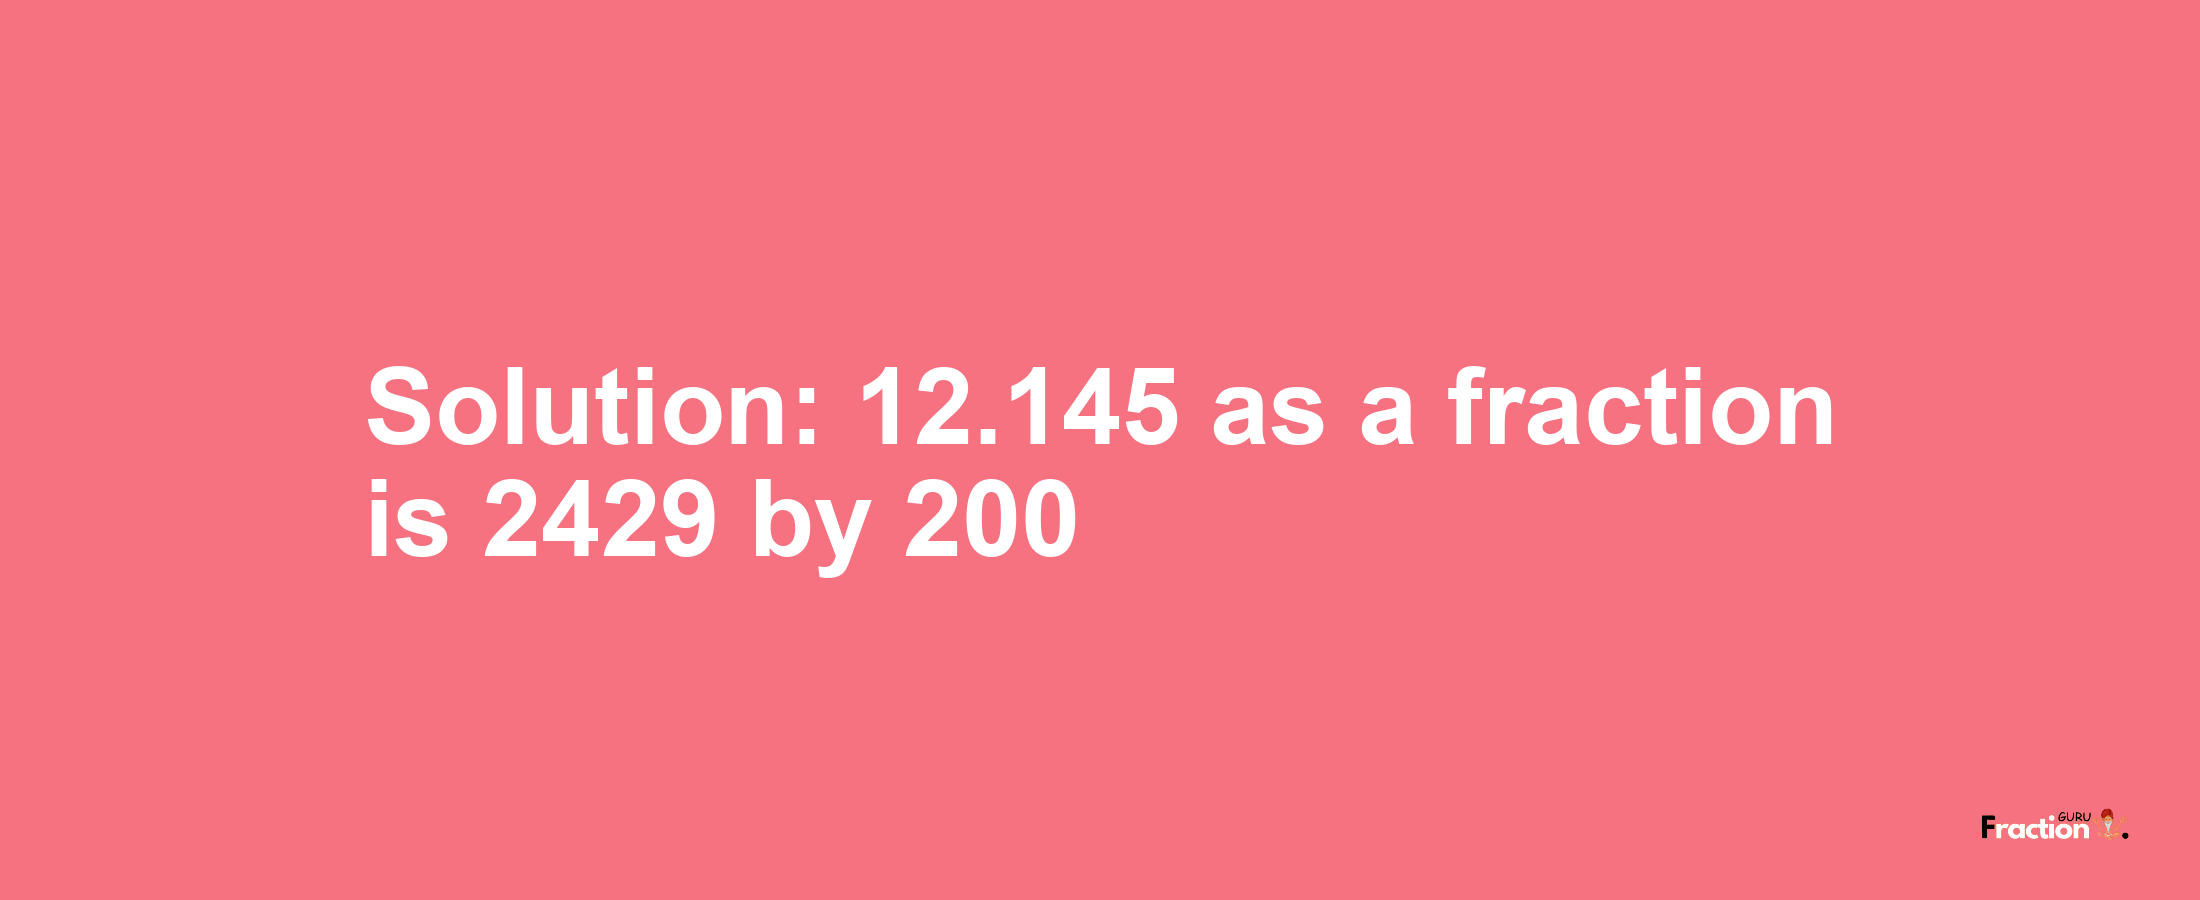 Solution:12.145 as a fraction is 2429/200